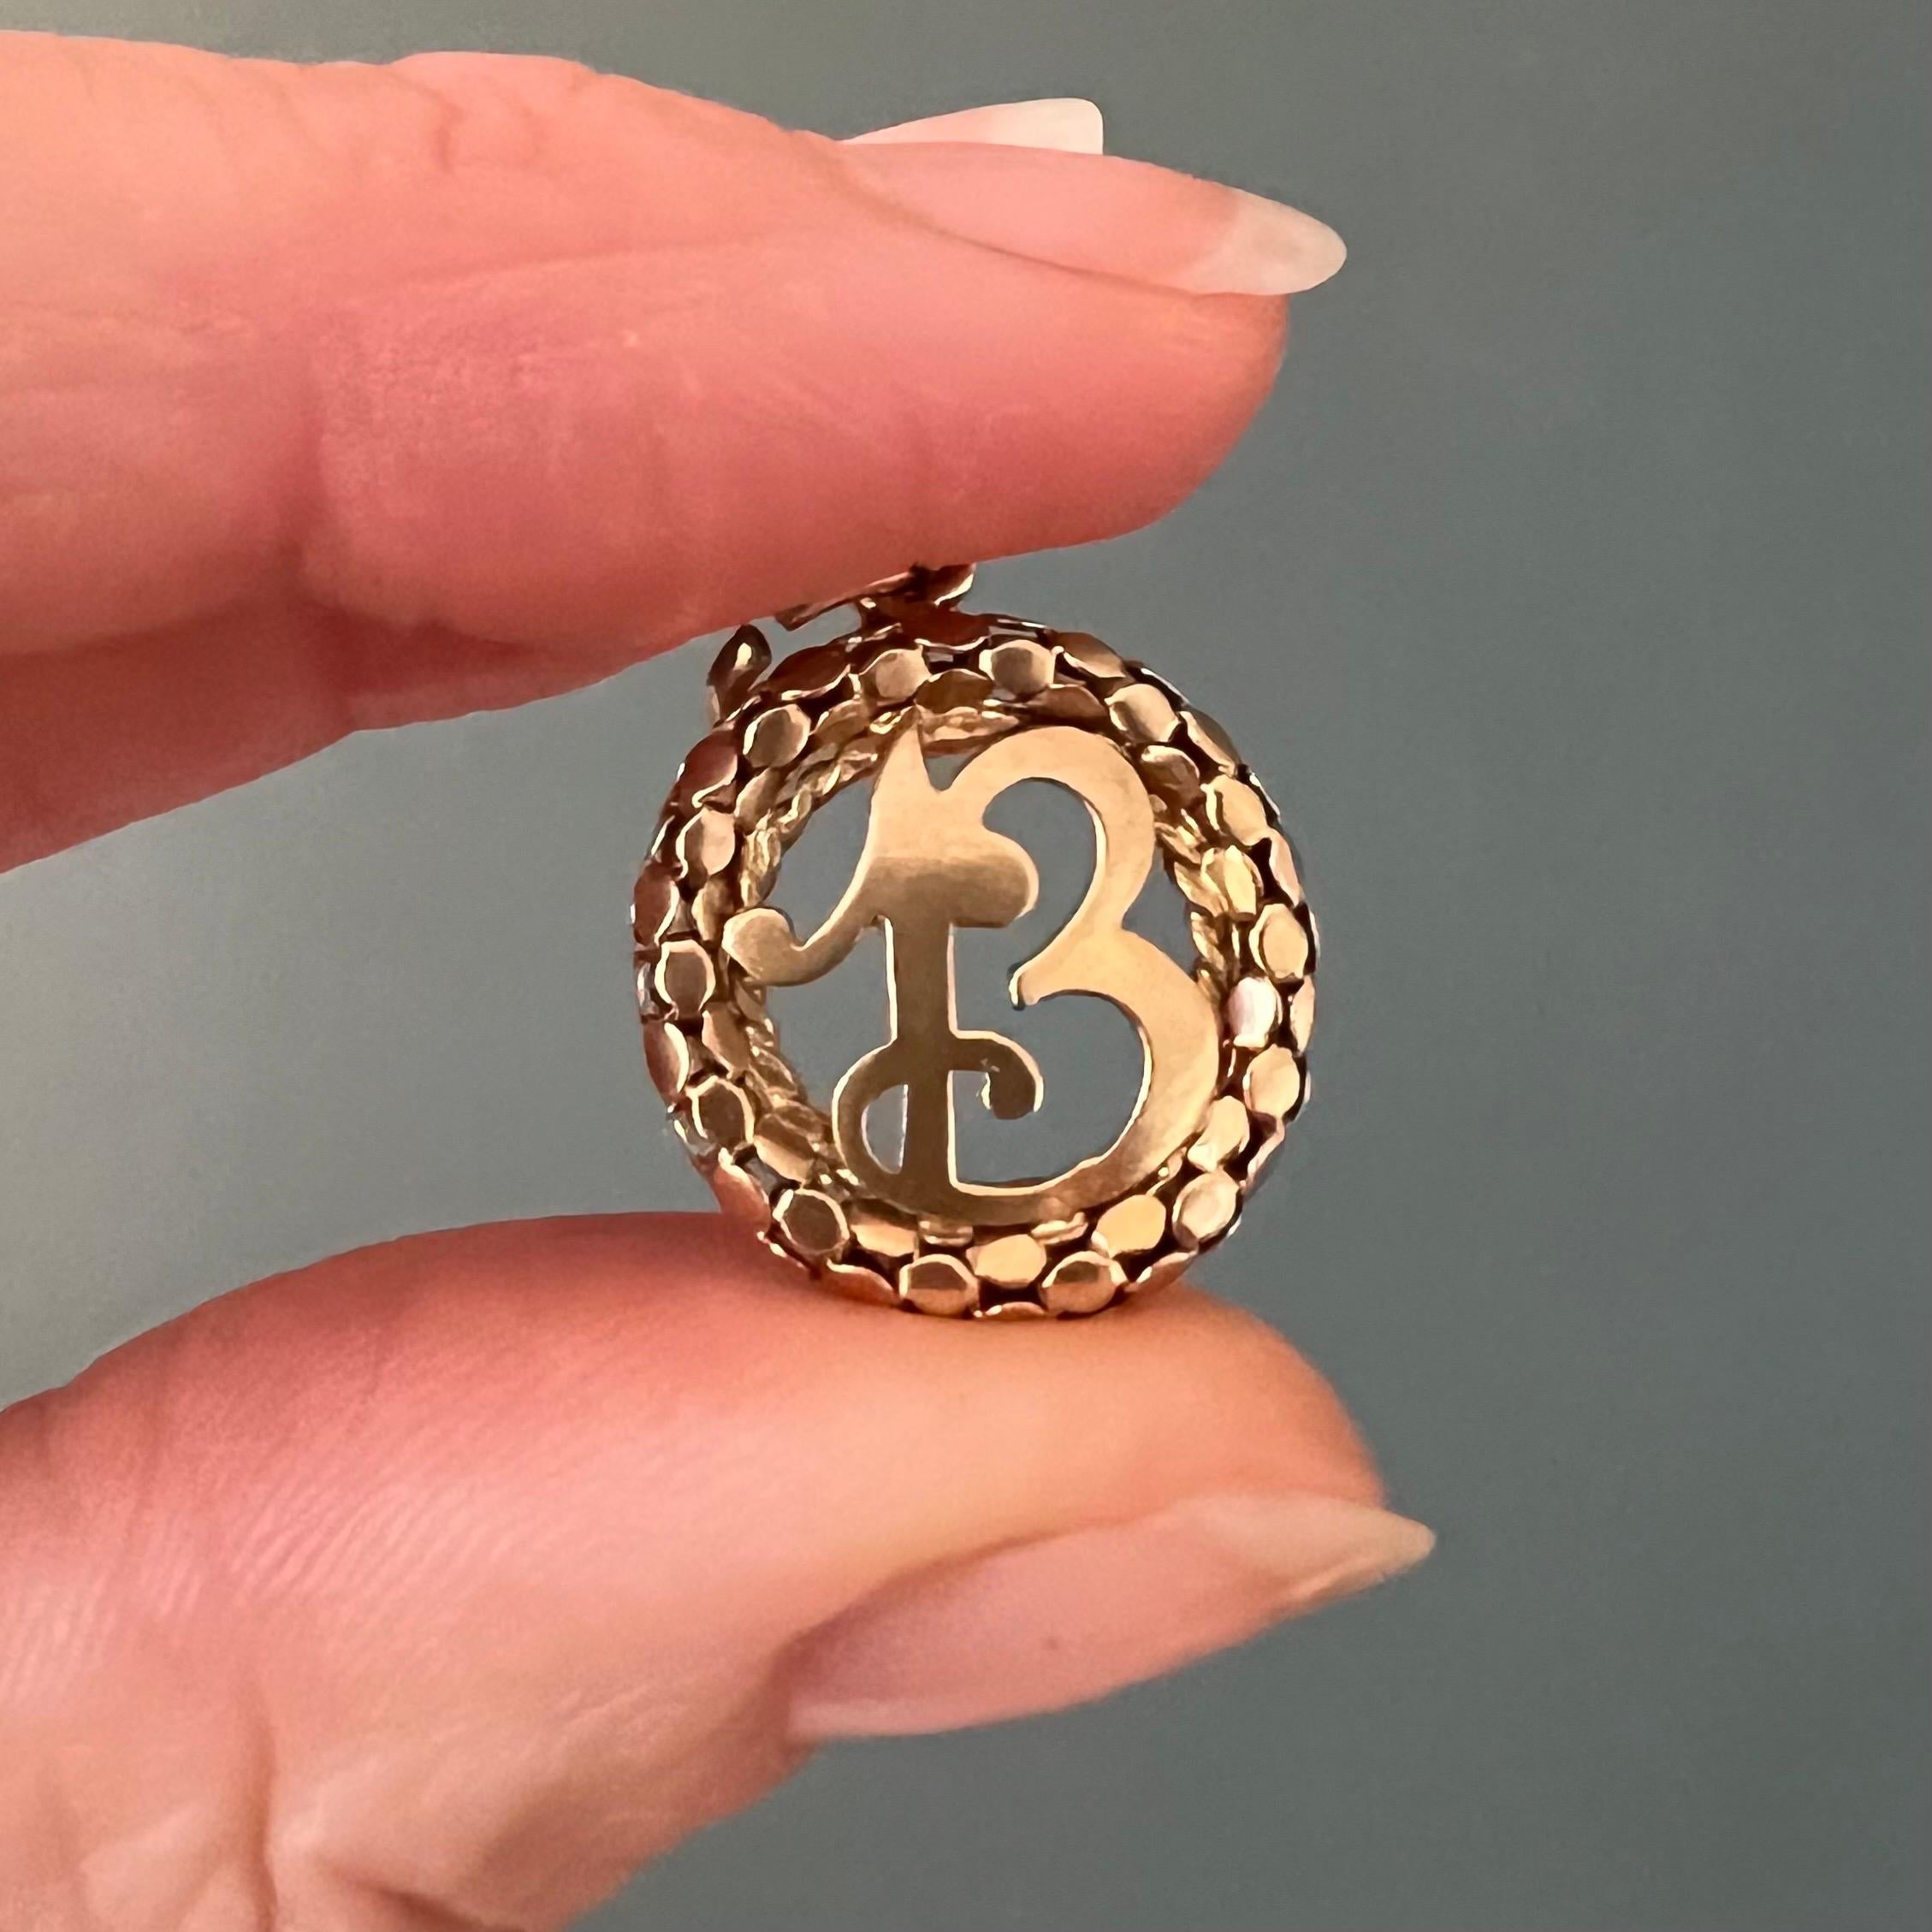 This number thirteen vintage charm pendant is created in 18 karat yellow gold. It features a rare and beautiful mesh popcorn wreath design and an ornate number 13 in the center. The mesh pop chain is a symbol of love, friendship, and connectivity.